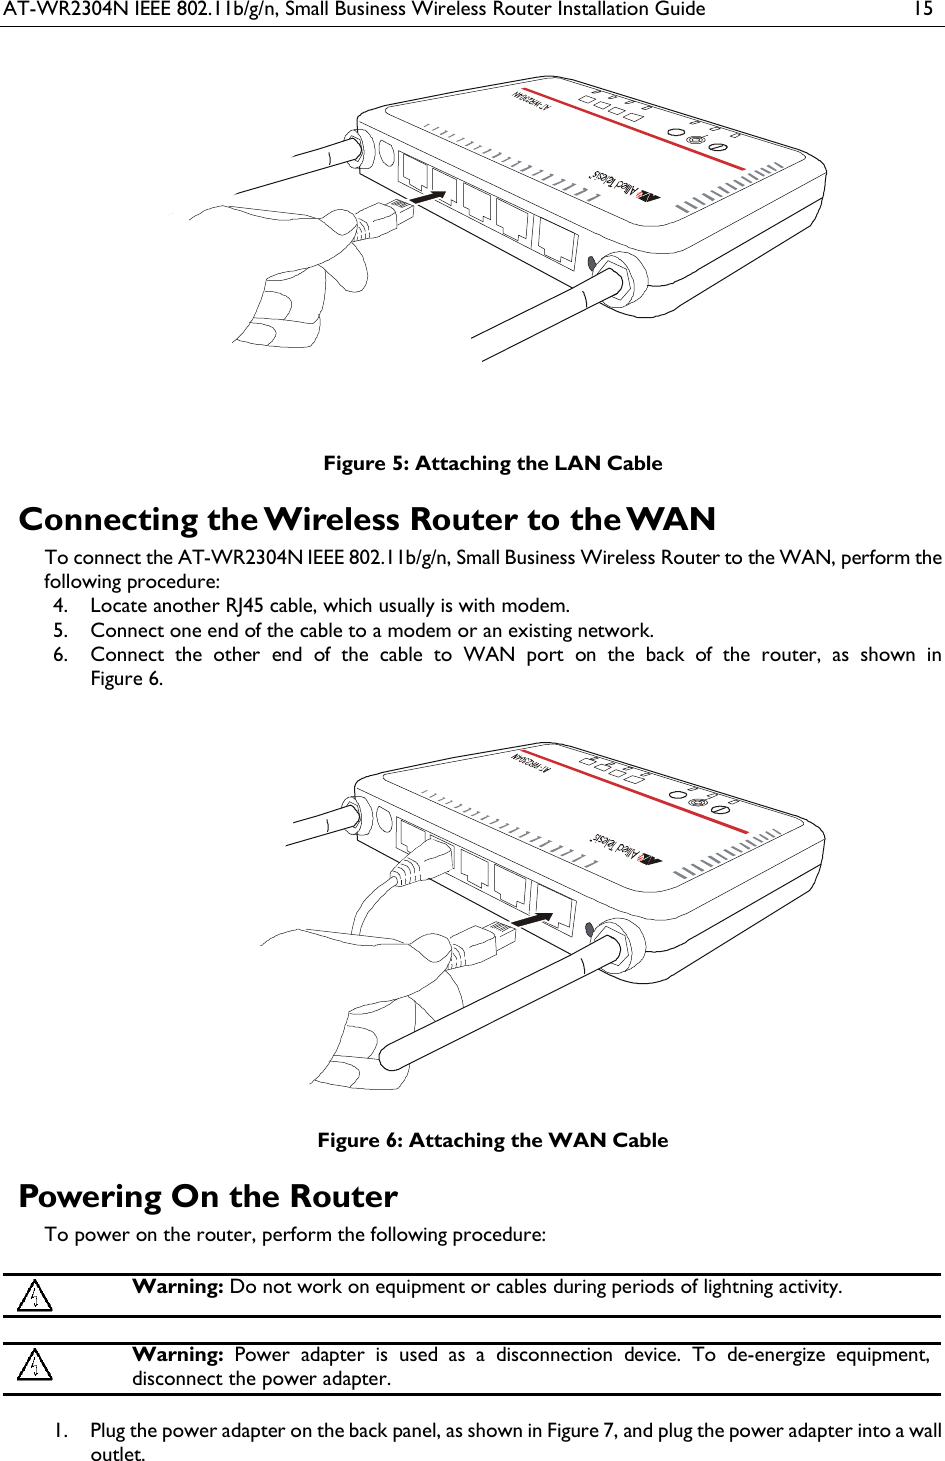 AT-WR2304N IEEE 802.11b/g/n, Small Business Wireless Router Installation Guide  15  Figure 5: Attaching the LAN Cable Connecting the Wireless Router to the WAN To connect the AT-WR2304N IEEE 802.11b/g/n, Small Business Wireless Router to the WAN, perform the following procedure:  Locate another RJ45 cable, which usually is with modem. 4. Connect one end of the cable to a modem or an existing network. 5. Connect  the  other  end  of  the  cable  to  WAN  port  on  the  back  of  the  router,  as  shown  in  6.Figure 6.  Figure 6: Attaching the WAN Cable Powering On the Router To power on the router, perform the following procedure:   Warning: Do not work on equipment or cables during periods of lightning activity.   Warning: Power adapter is  used  as  a  disconnection  device.  To  de-energize  equipment, disconnect the power adapter.   Plug the power adapter on the back panel, as shown in Figure 7, and plug the power adapter into a wall 1.outlet.  